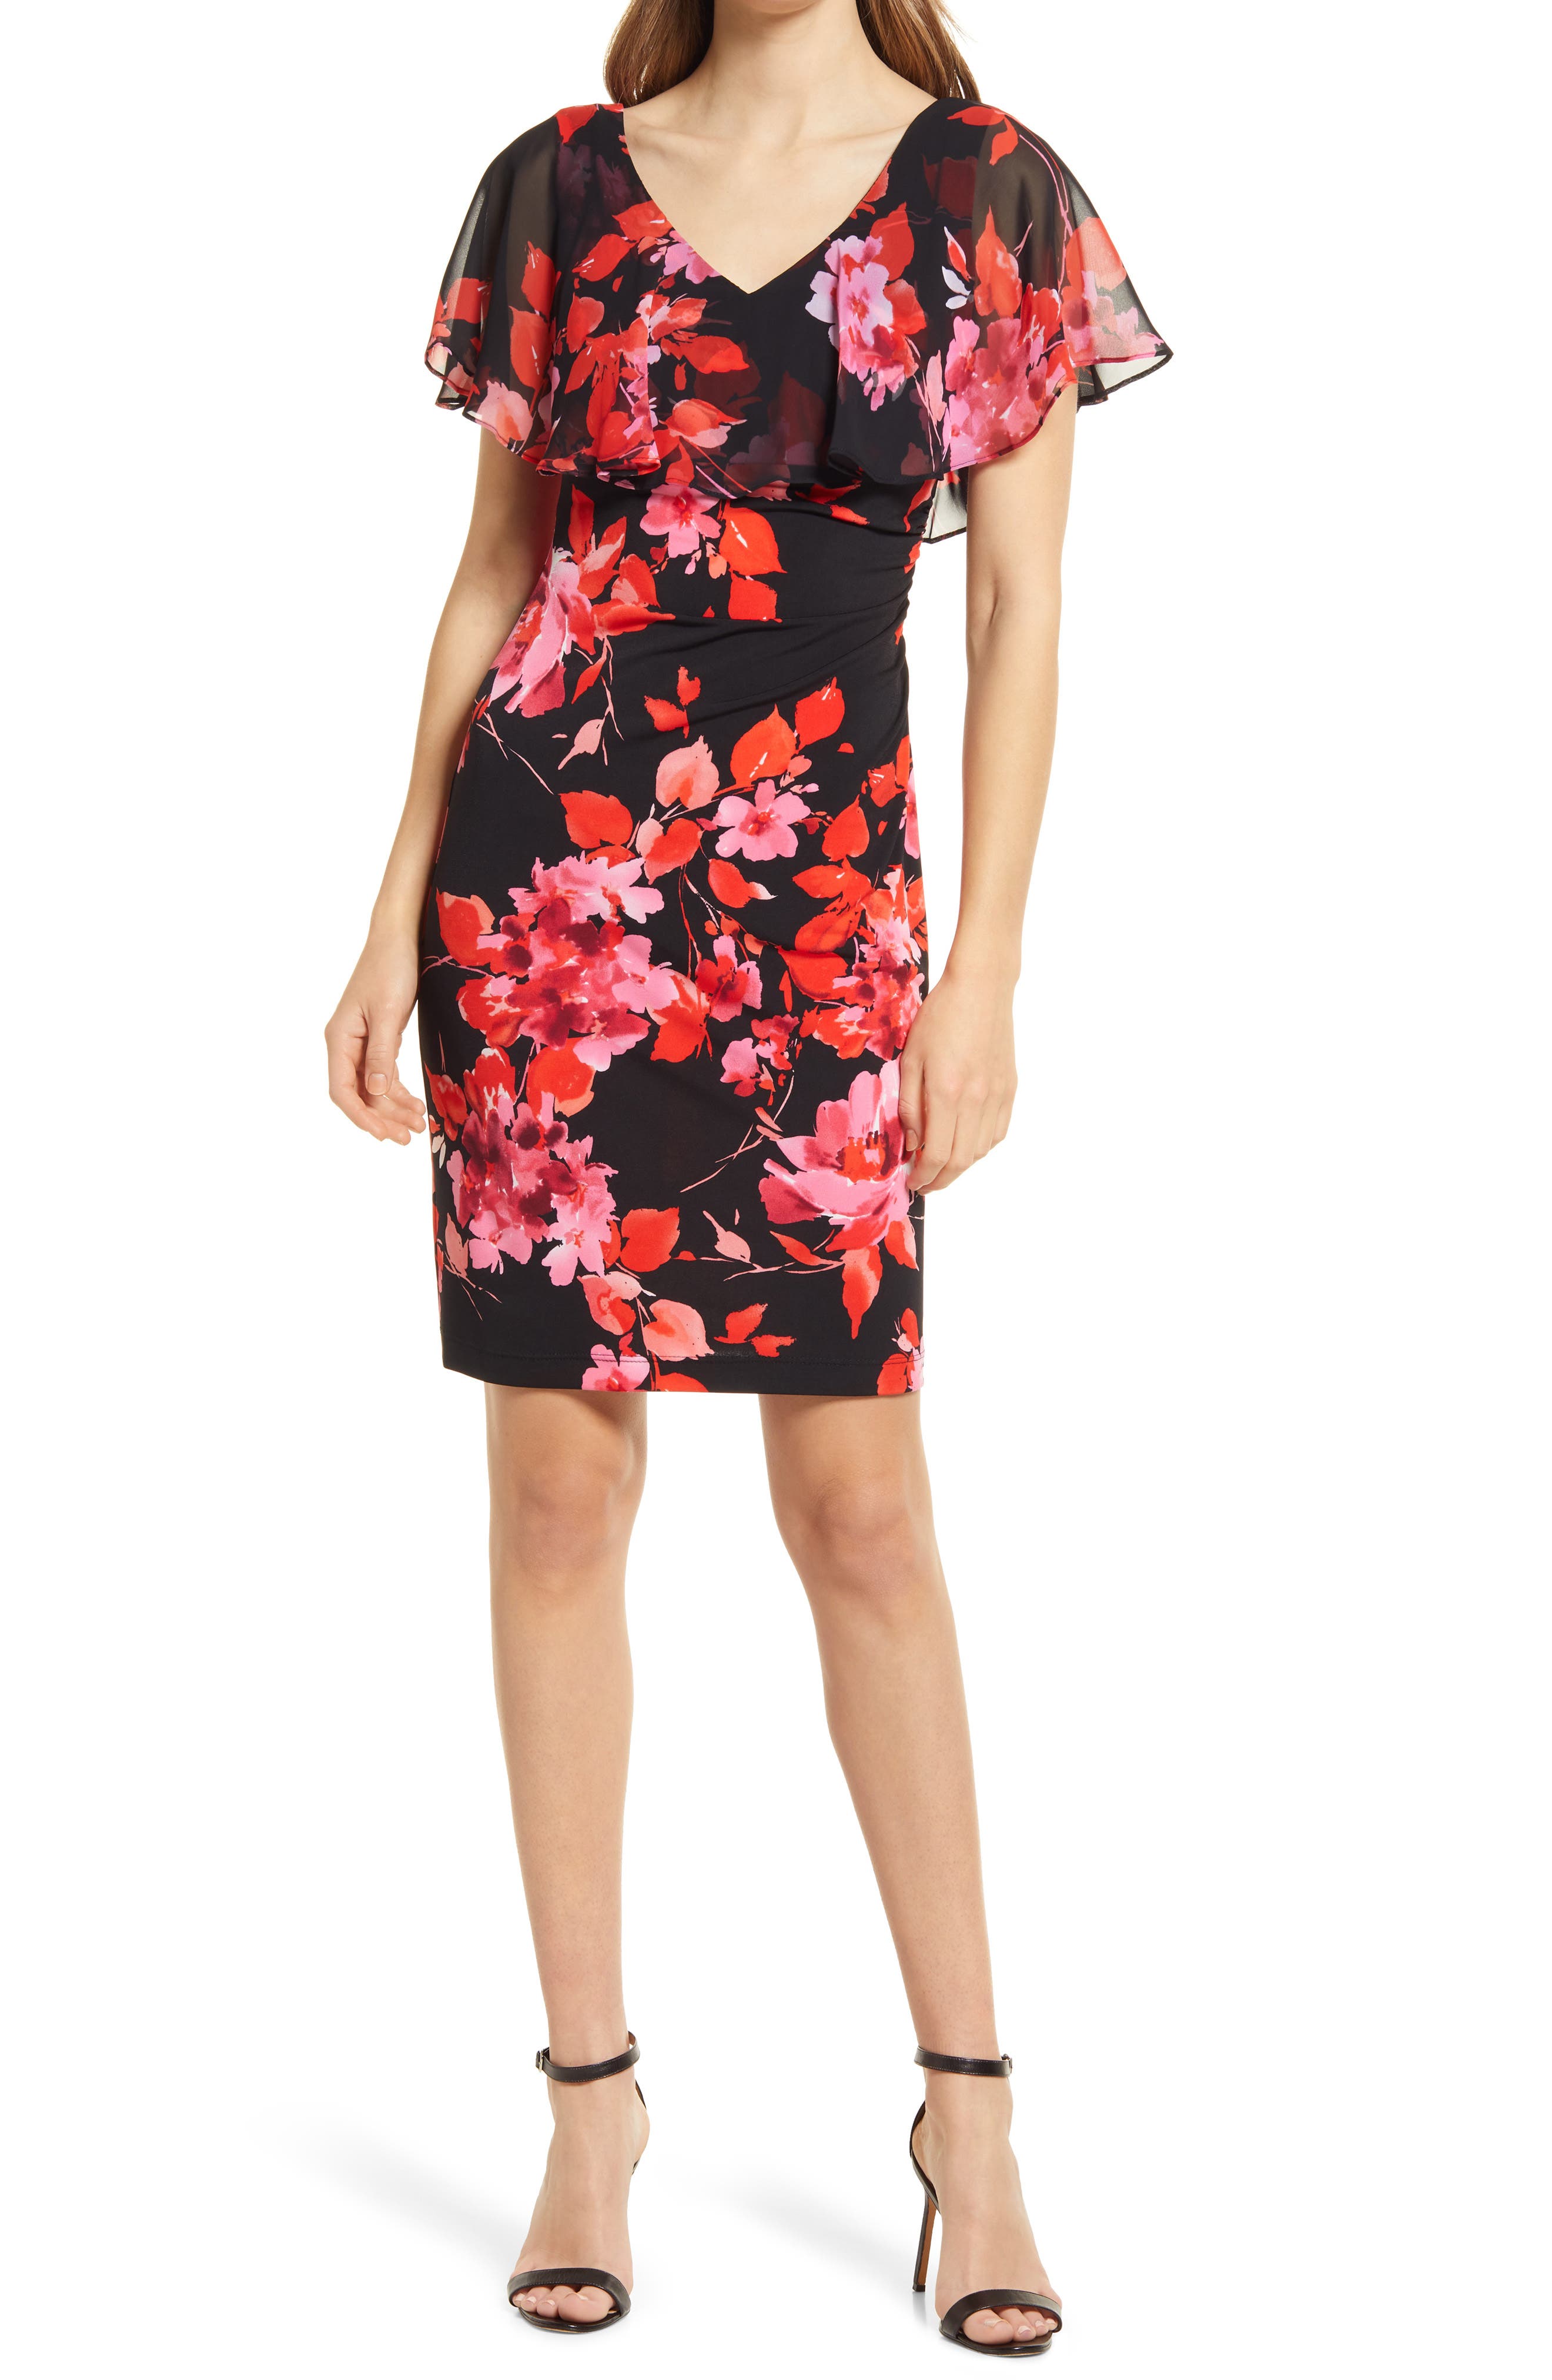 Connected Apparel Womens Petites Floral Print Bell Sleeves Casual Dress